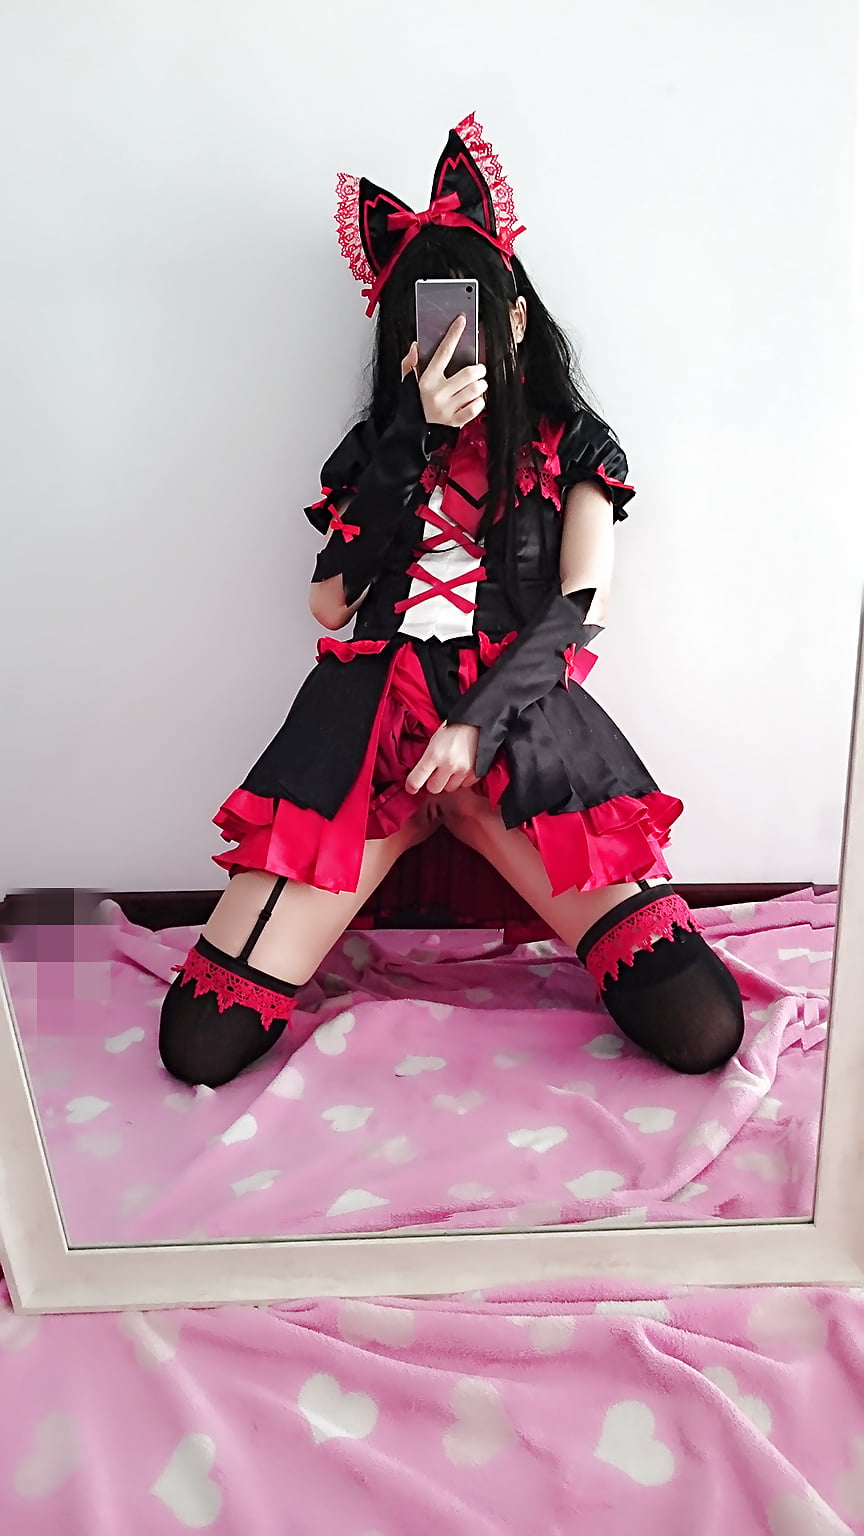 Japanese_cosplay_girl_exposed (15/28)